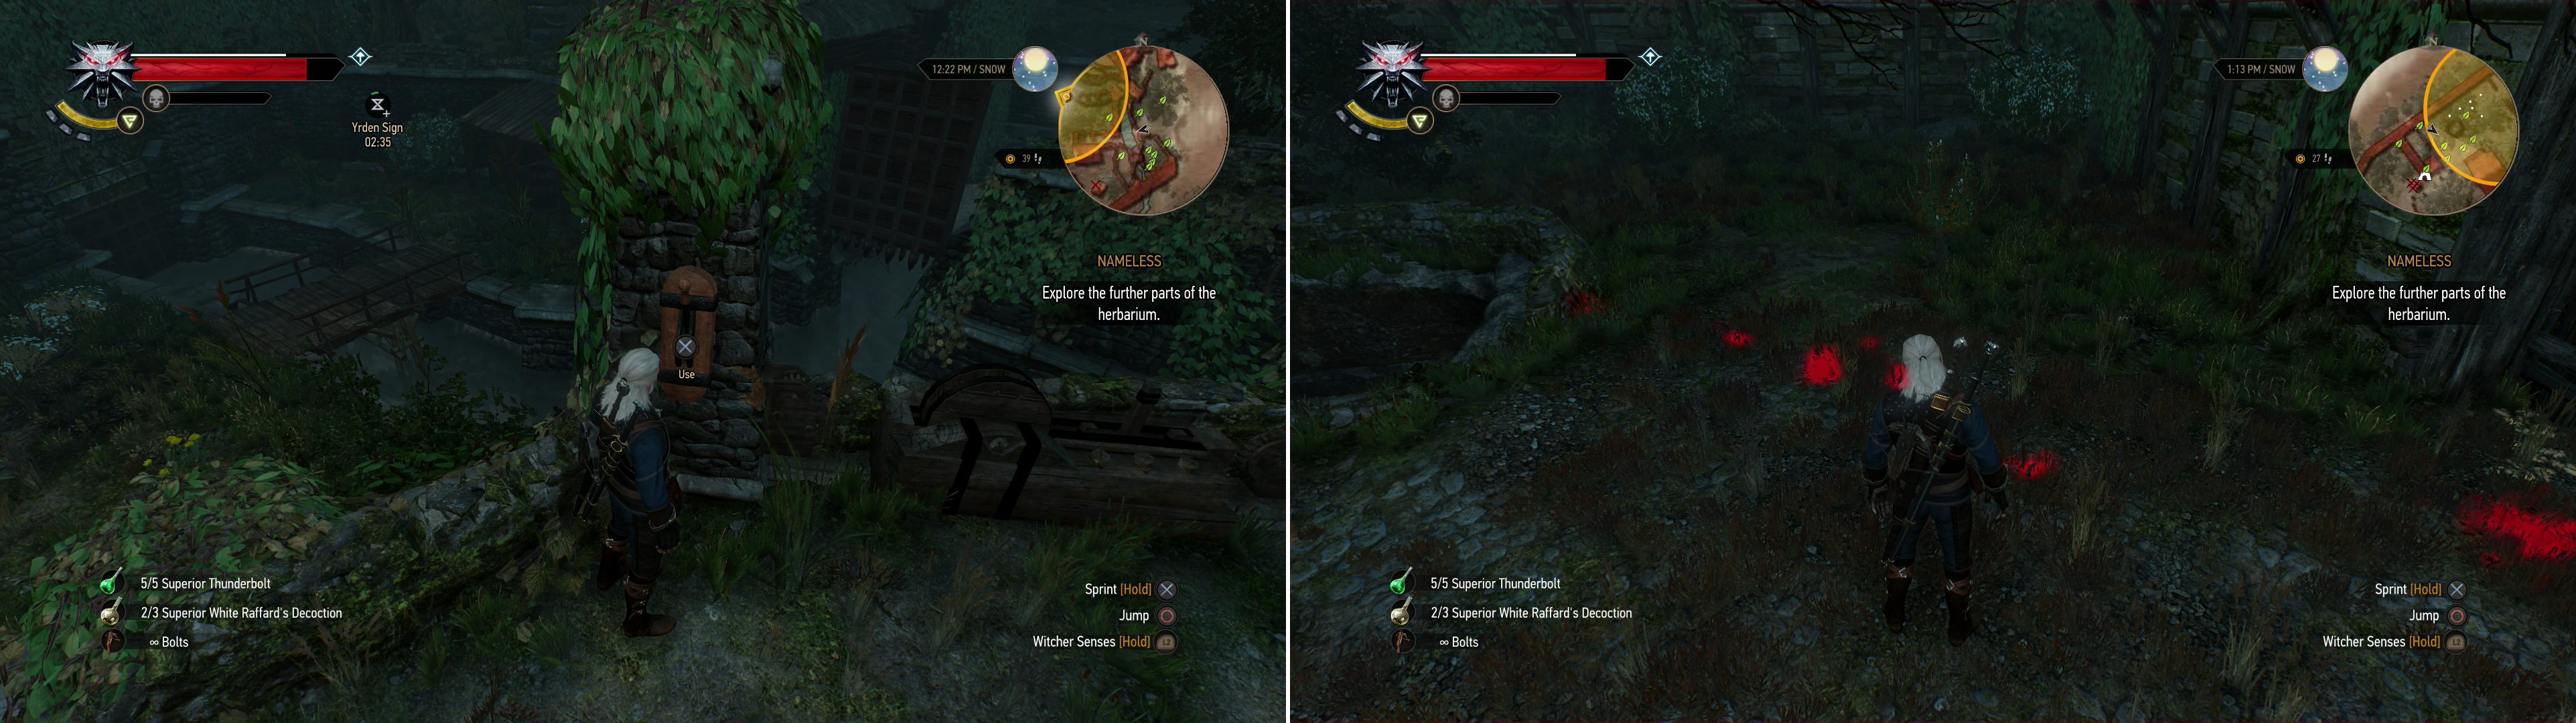 Activate a lever to open a sluice gate (left). Use your Witcher Senses to follow Craven's retreat into a well (right).